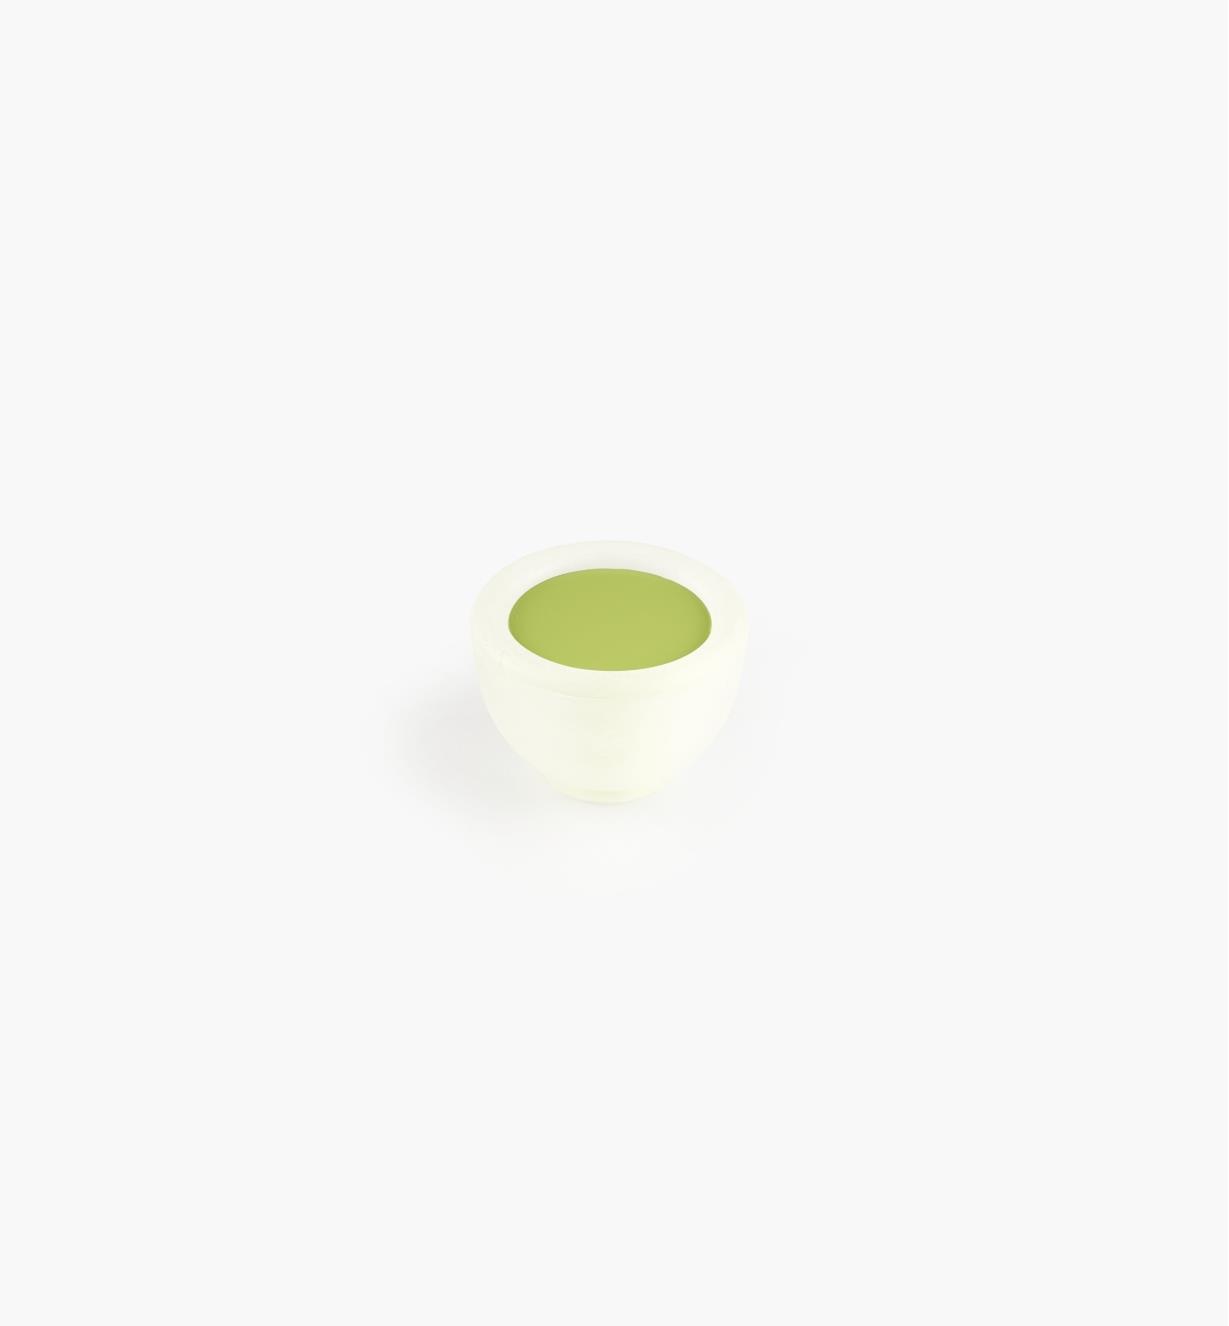 00W5420 - 35mm Bungee Round Knob, Chartreuse